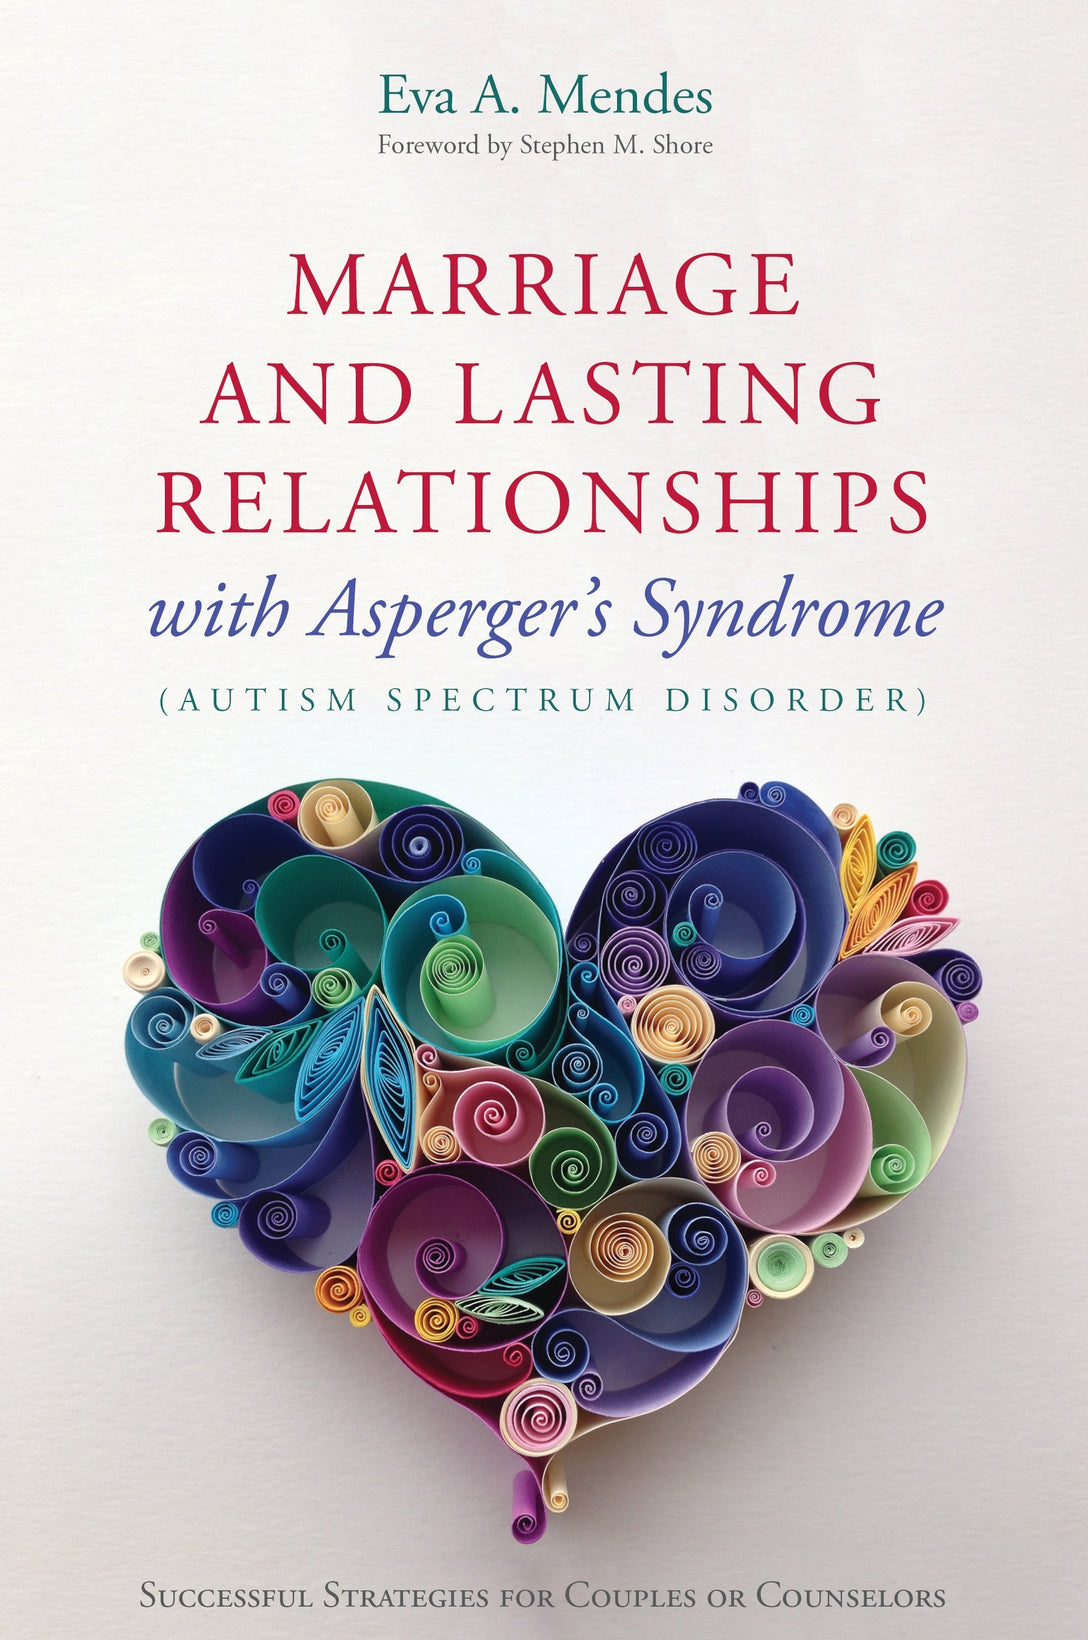 Marriage and Lasting Relationships with Asperger's Syndrome (Autism Spectrum Disorder) by Stephen M. Shore, Eva A. Mendes